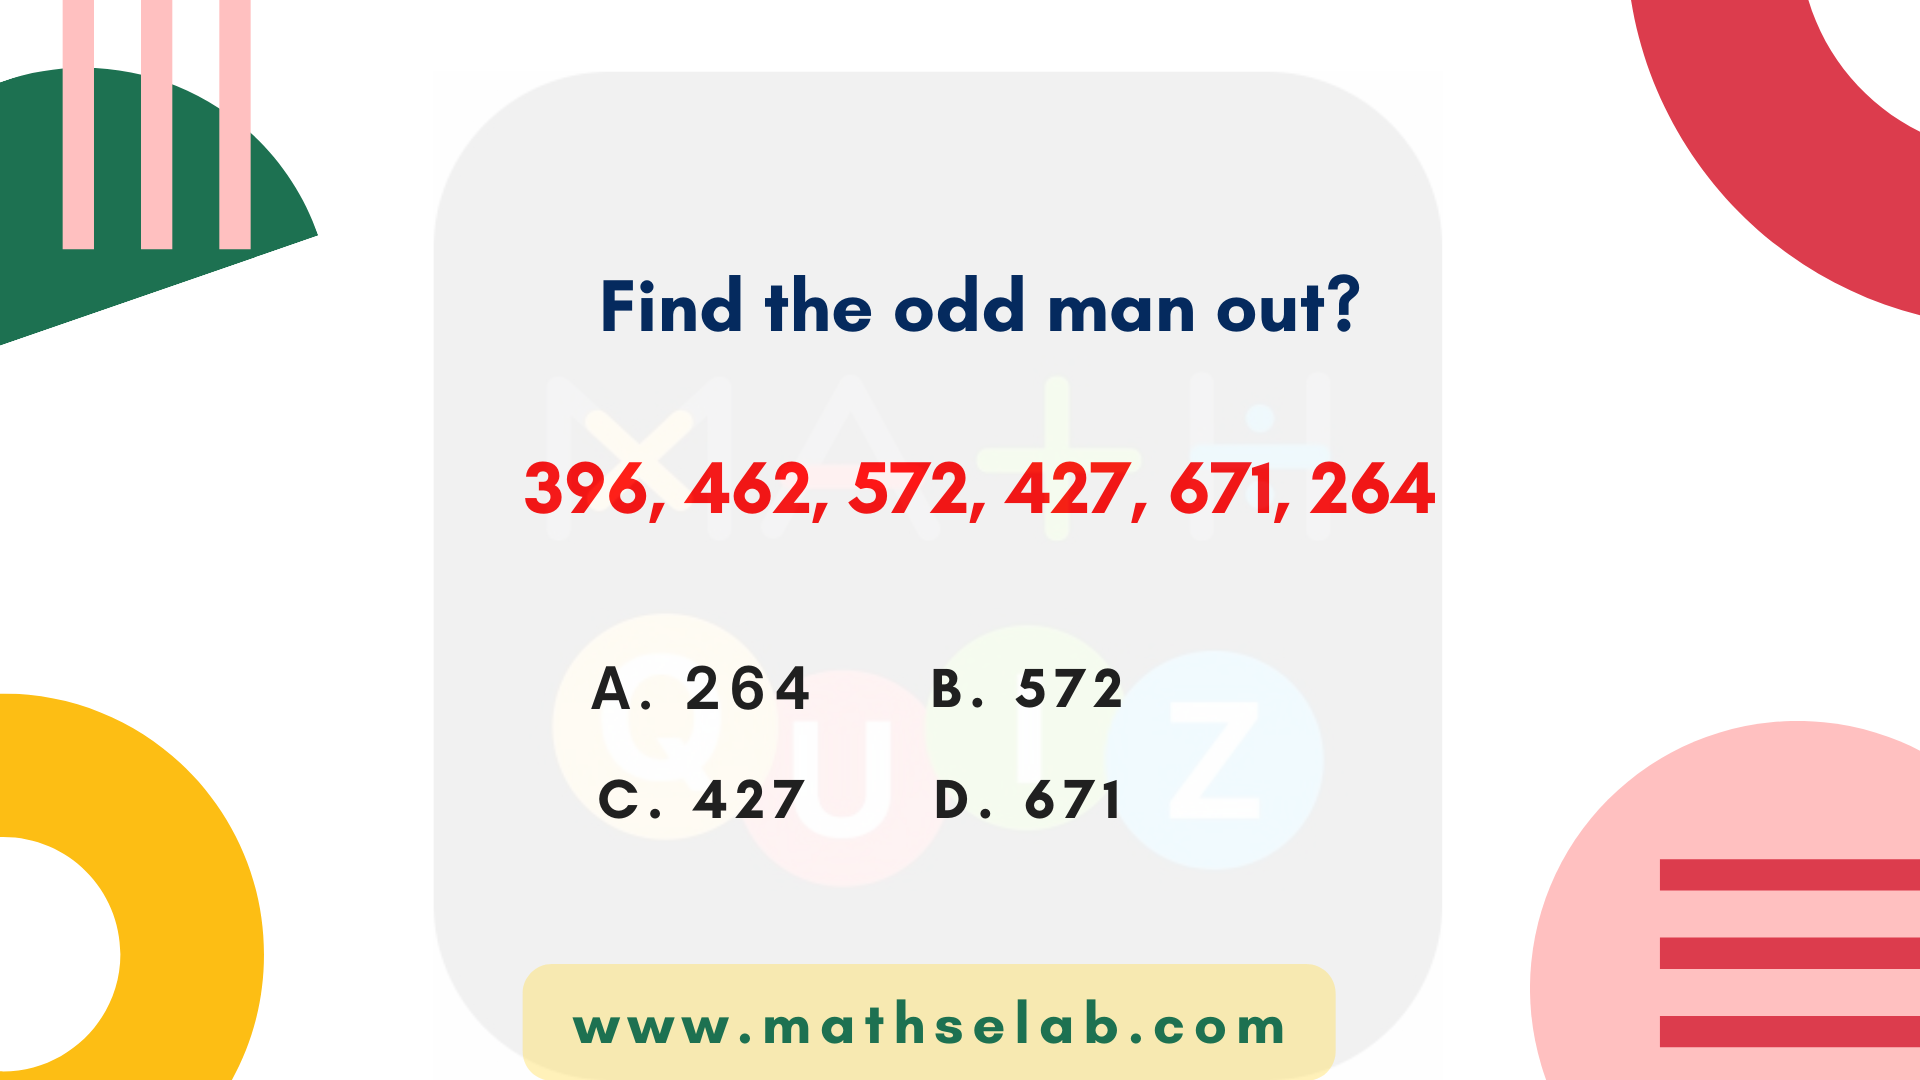 Find the odd man out?  396, 462, 572, 427, 671, 264.